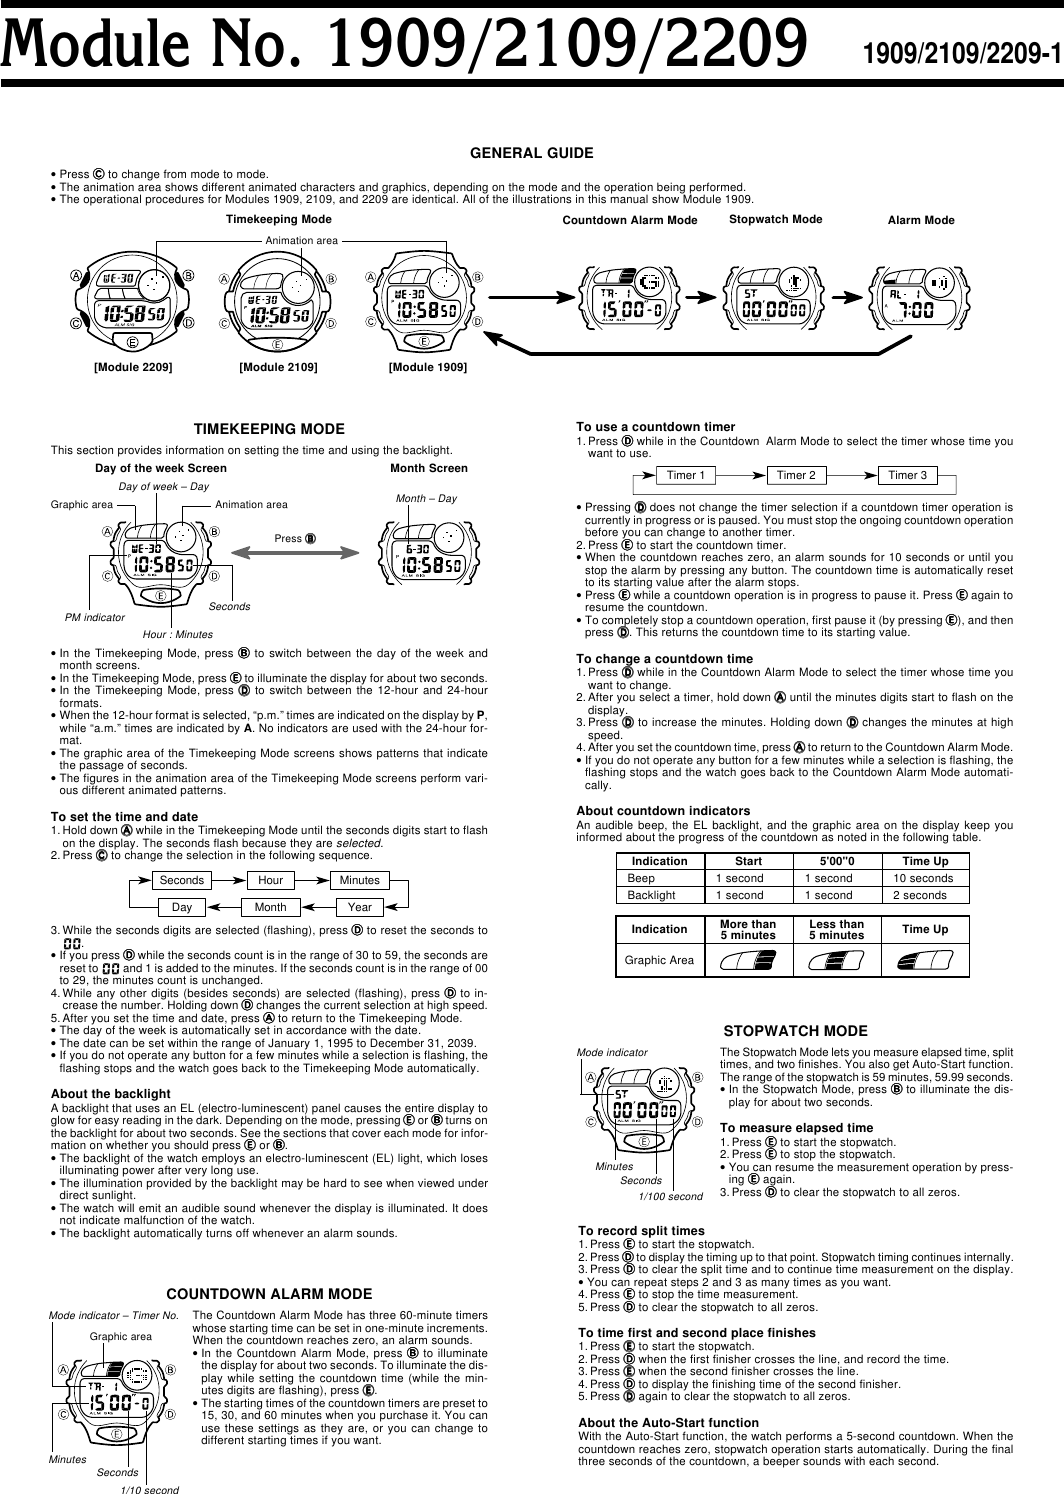 Page 1 of 2 - Casio Casio-Casio-Watch-2109-Users-Manual- QW-1909/2109/2209  Casio-casio-watch-2109-users-manual